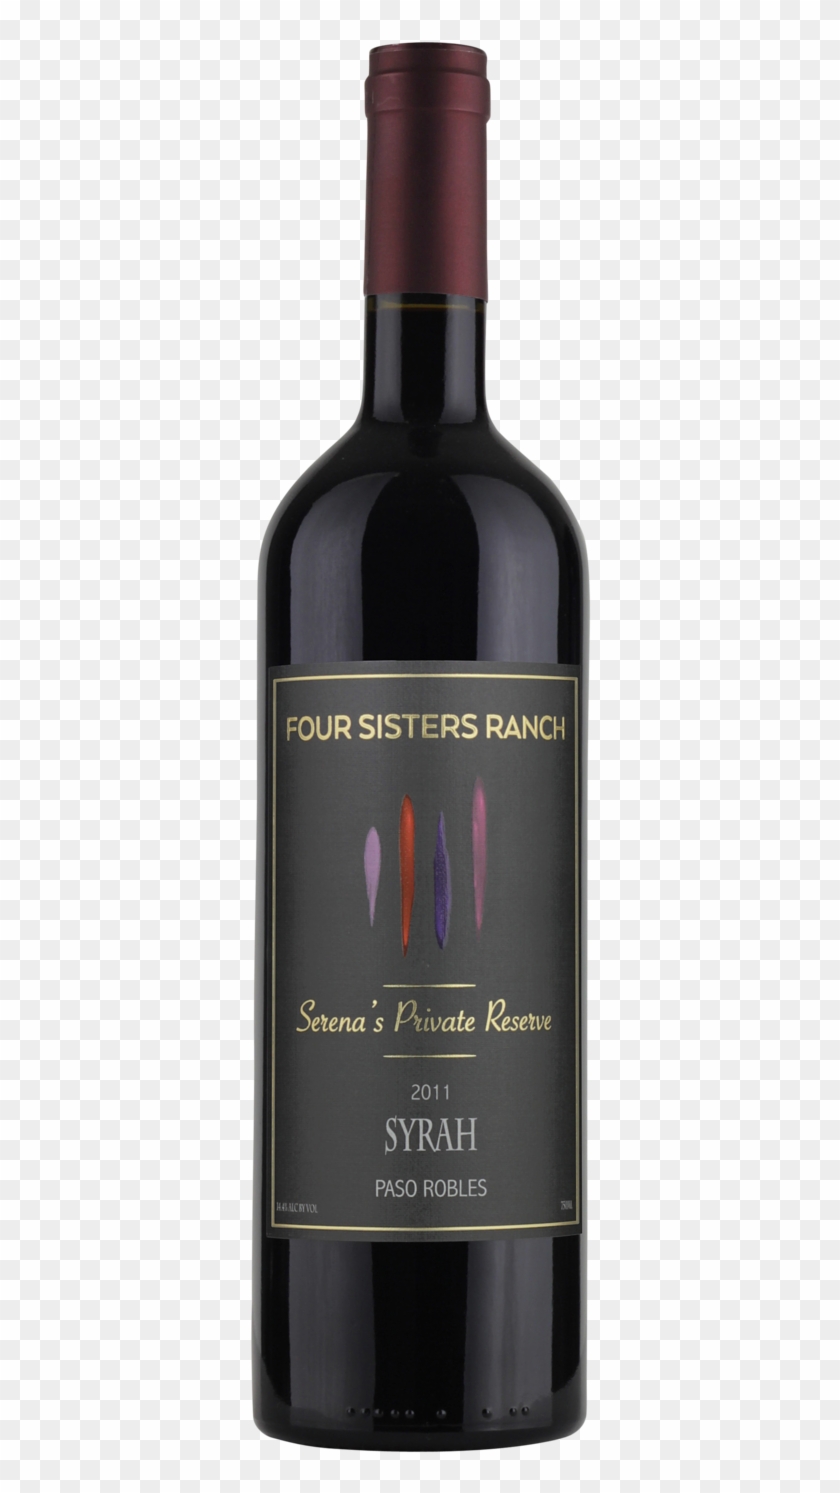 2011 Serena's Private Reserve Syrah Four Sisters Ranch - American Crew Daily Shampoo 100ml Clipart